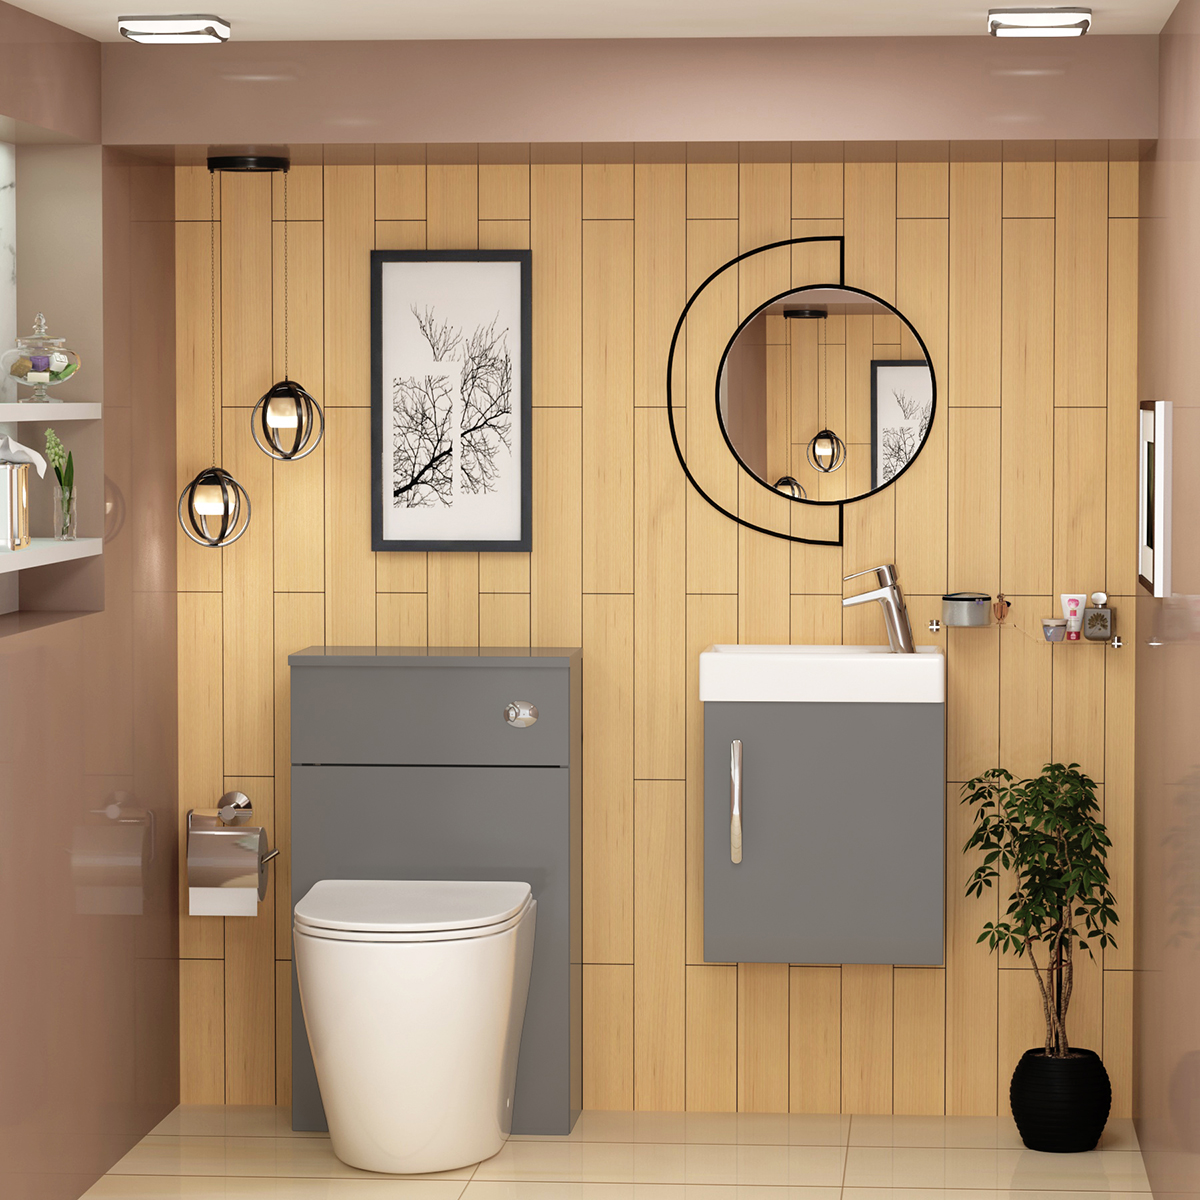 Bathroom Renovations and Remodelling Ideas for Future